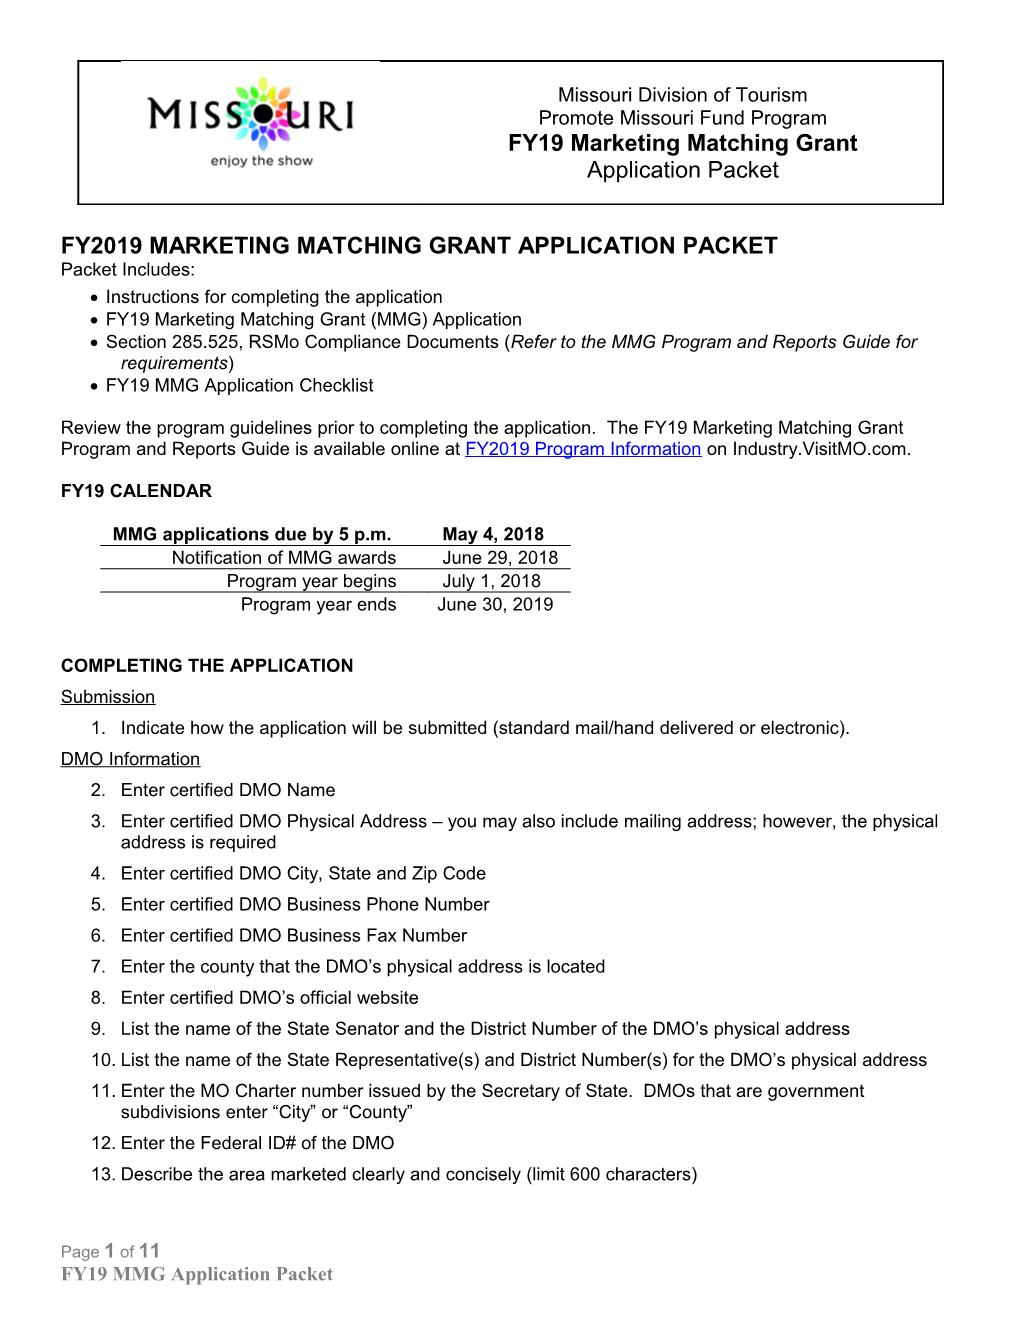 Fy2019 Marketing Matching Grant Application Packet